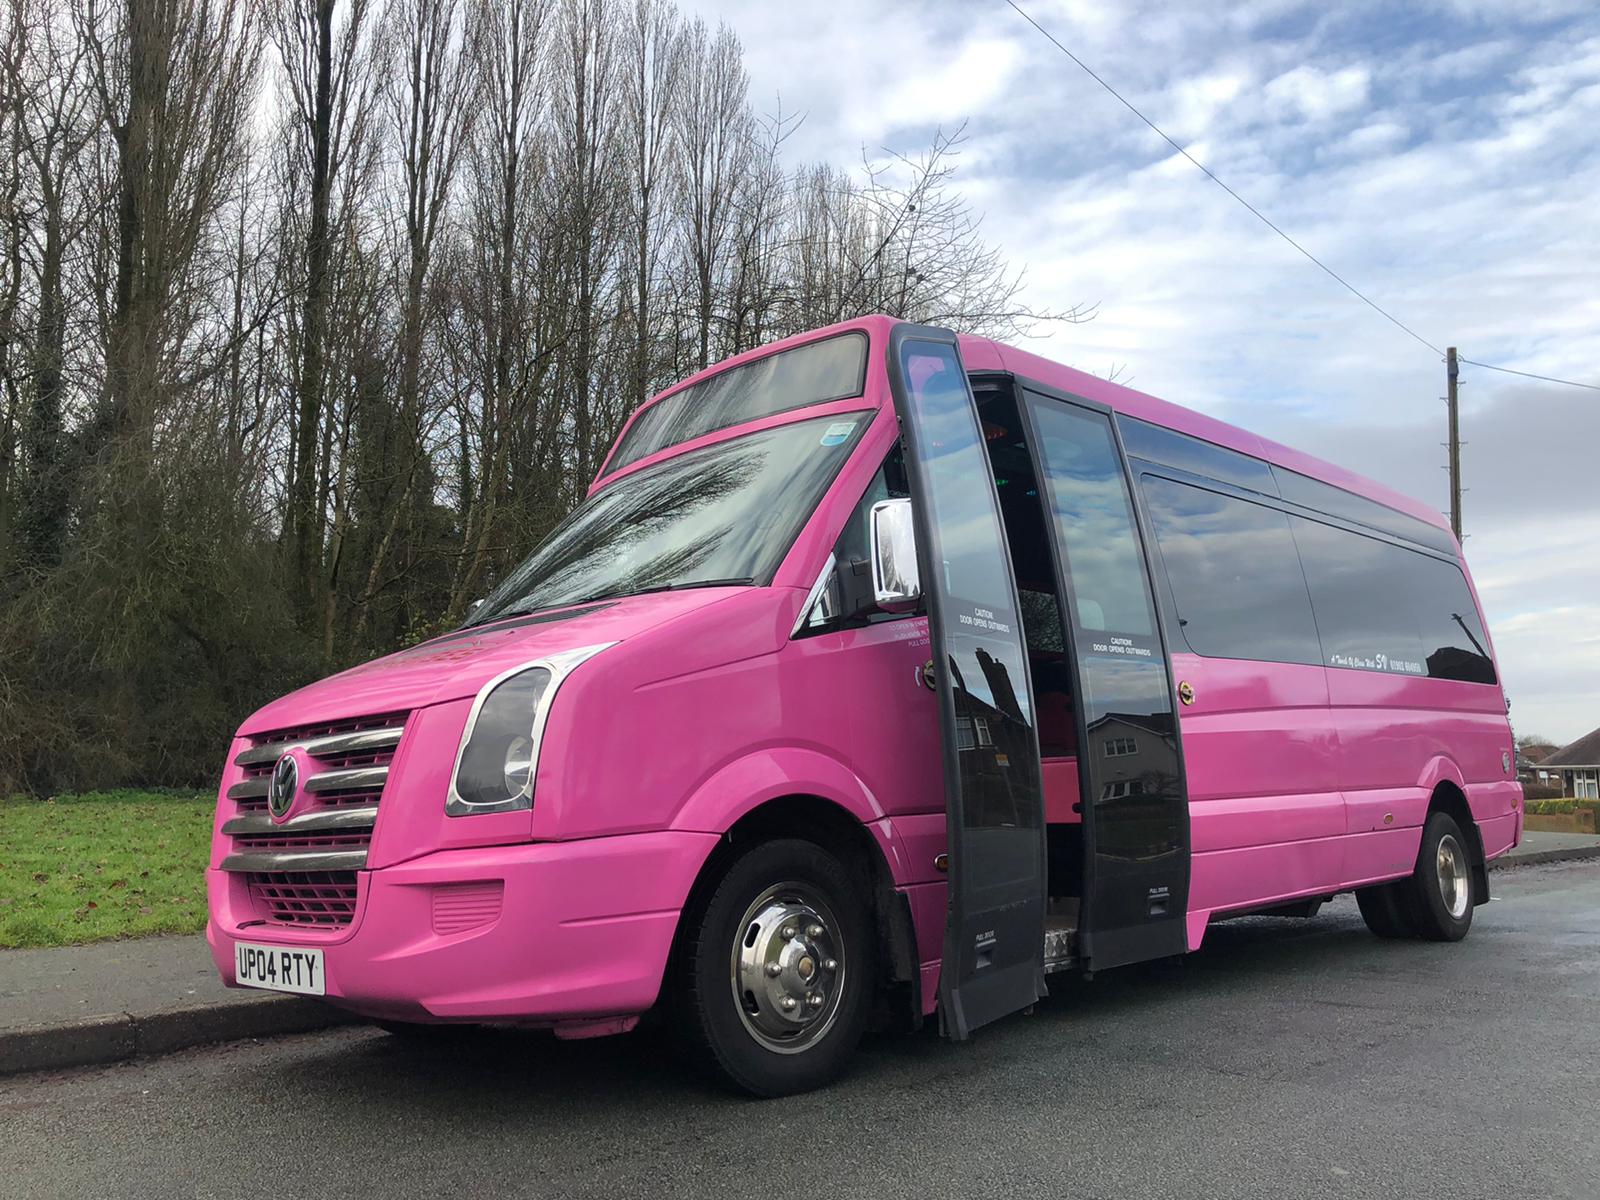 Top Safety Tips for a Memorable Home Counties Party Bus Experience